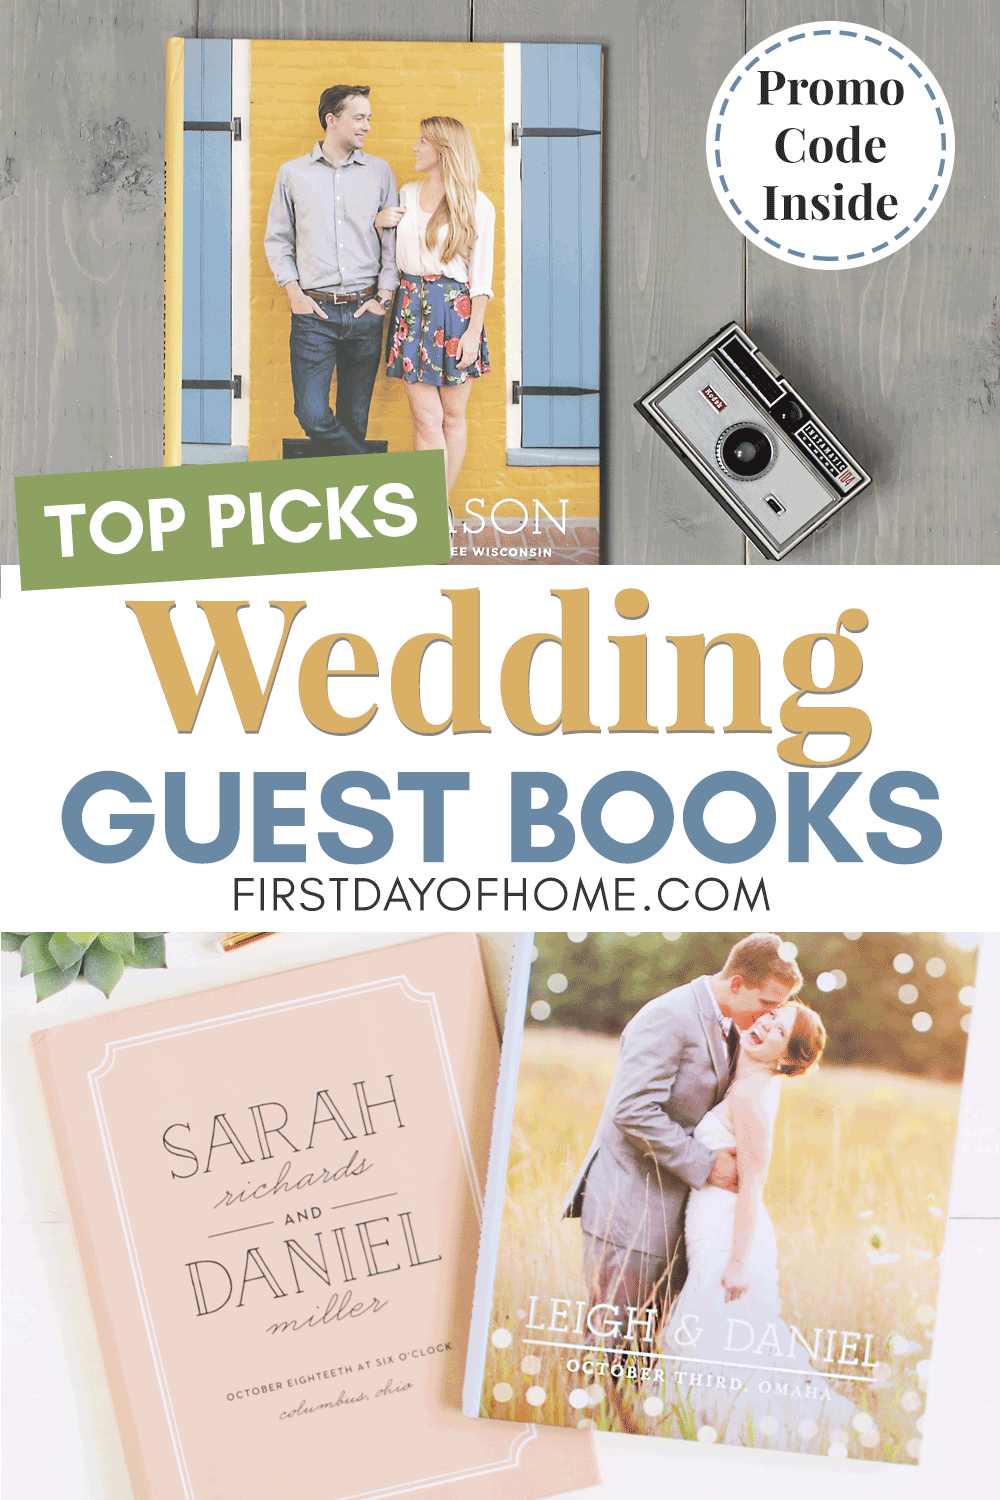 Wedding guest books - top picks from Basic Invite